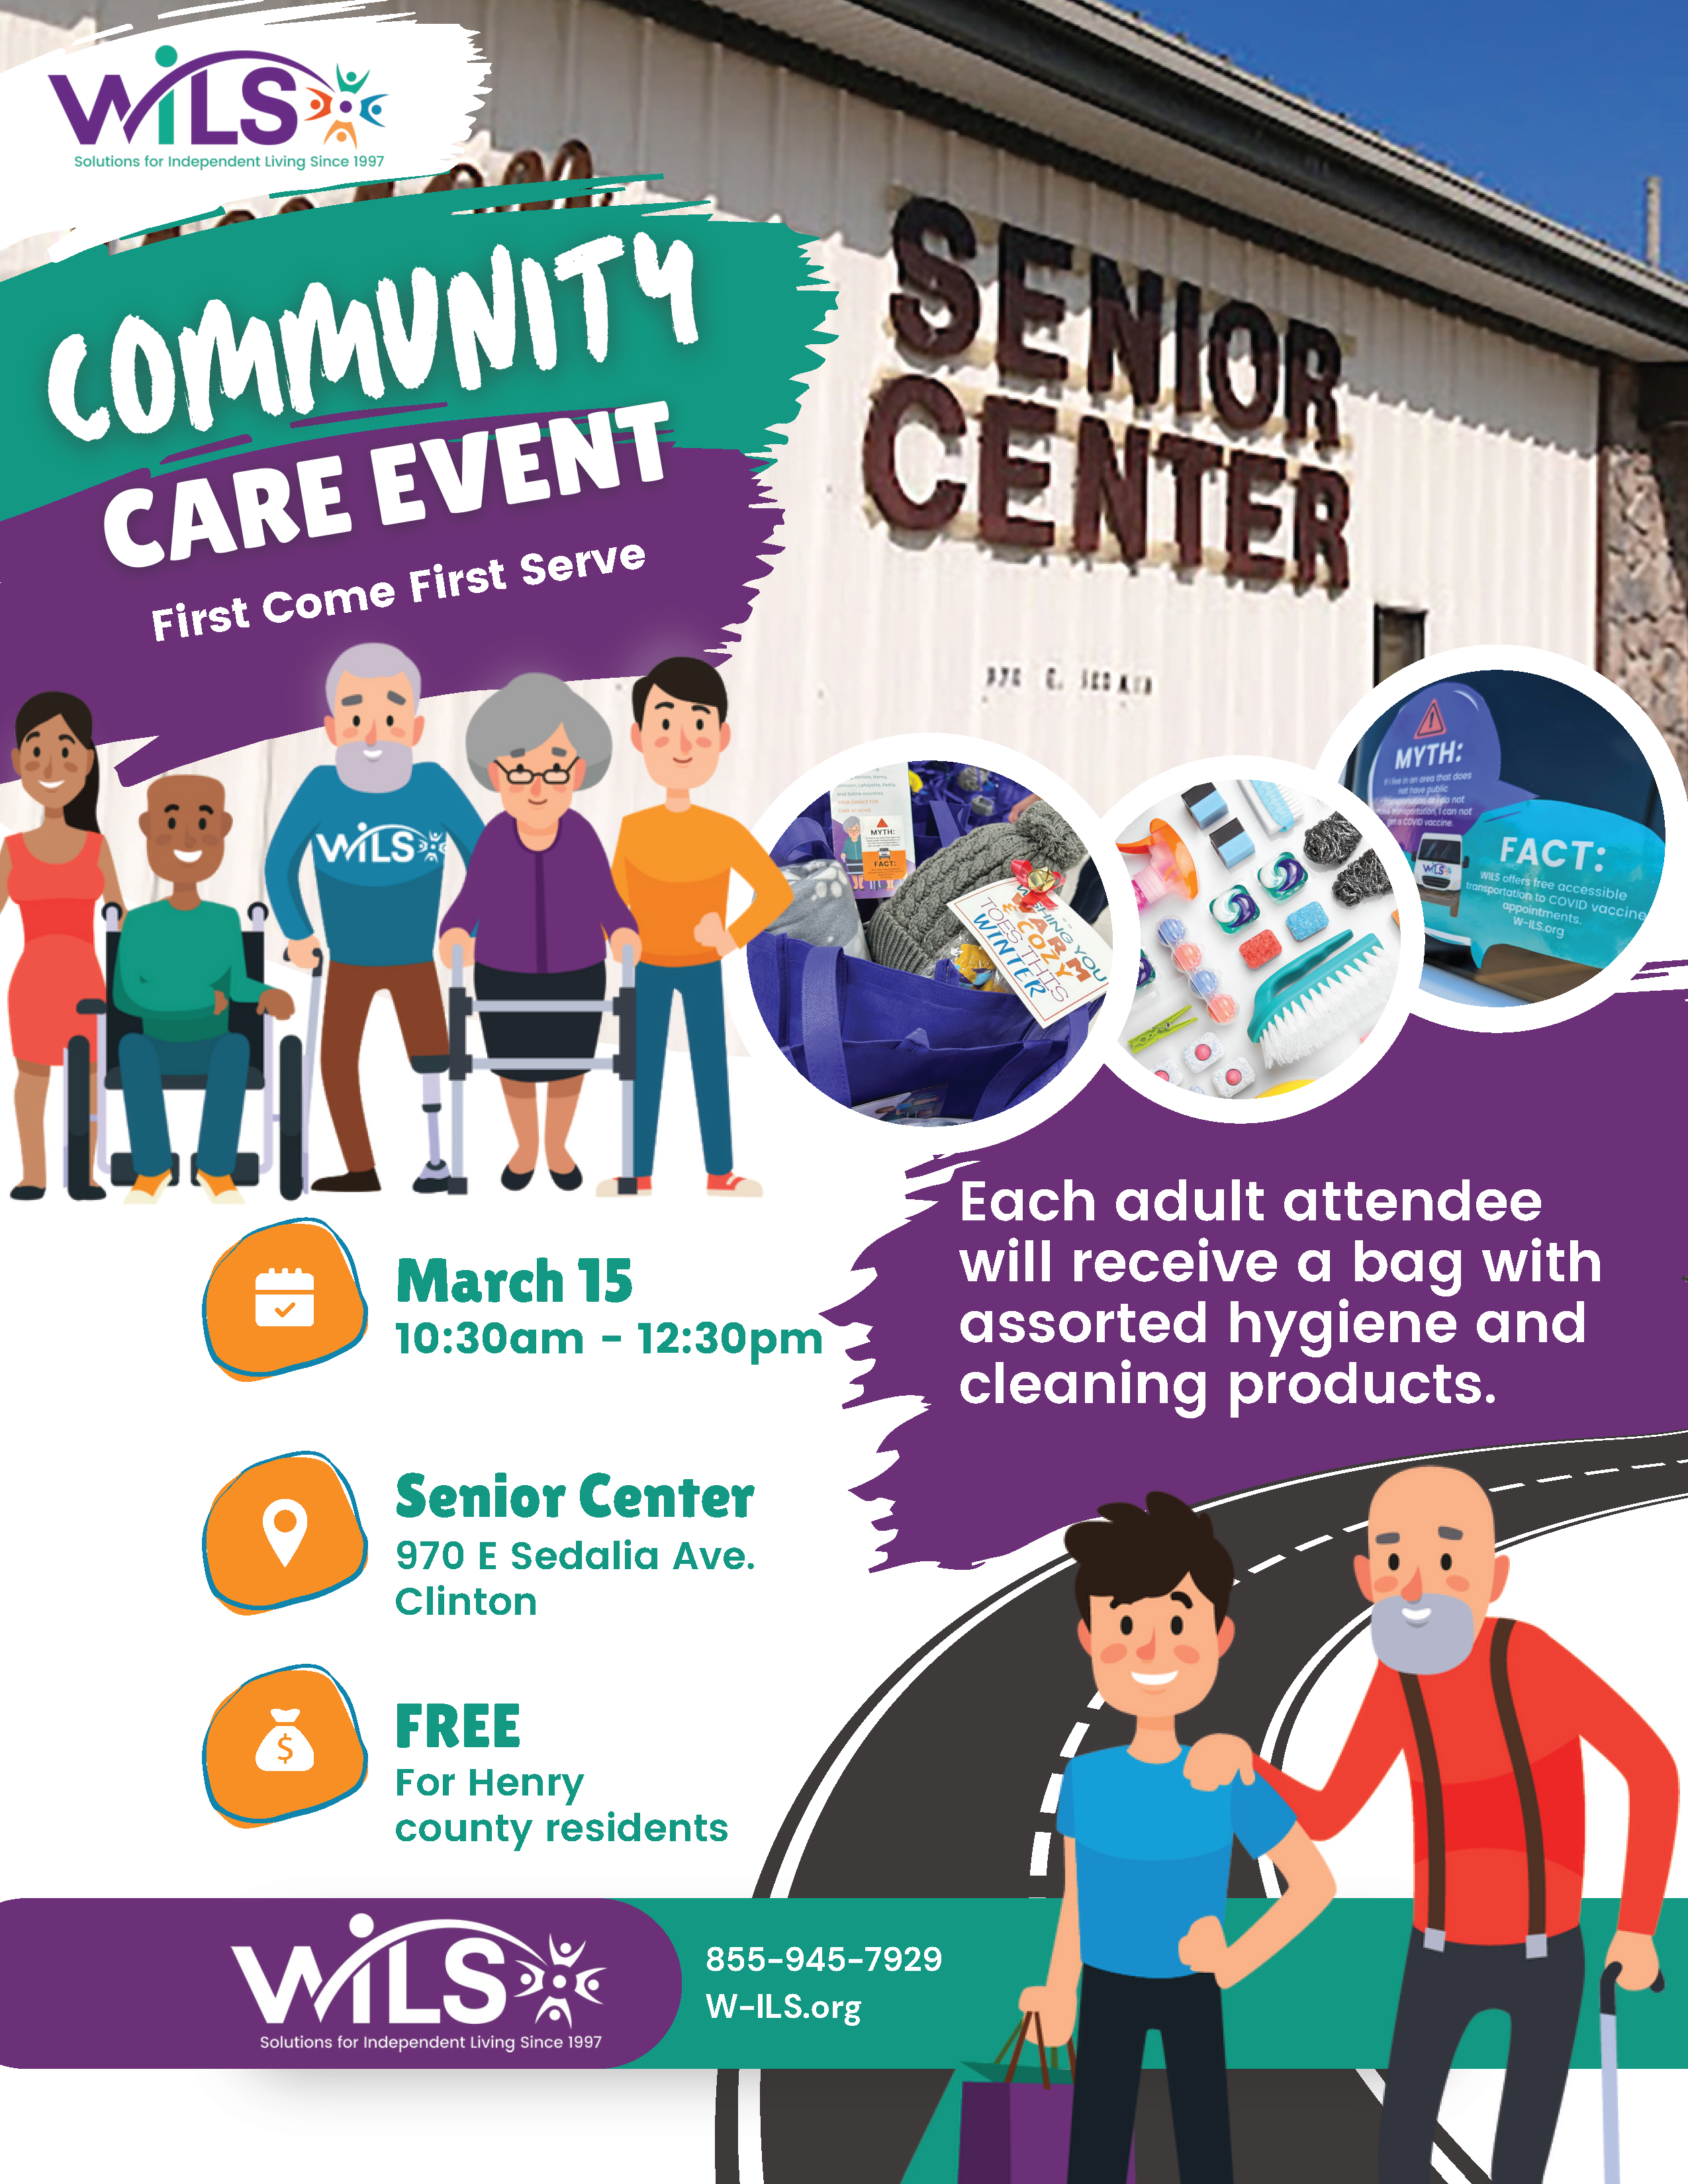 Community Event - First Come, First Serve. March 15
Senior Center
FREE 10:30am - 12:30pm
970 E Sedalia Ave. Clinton
For Henry county residents